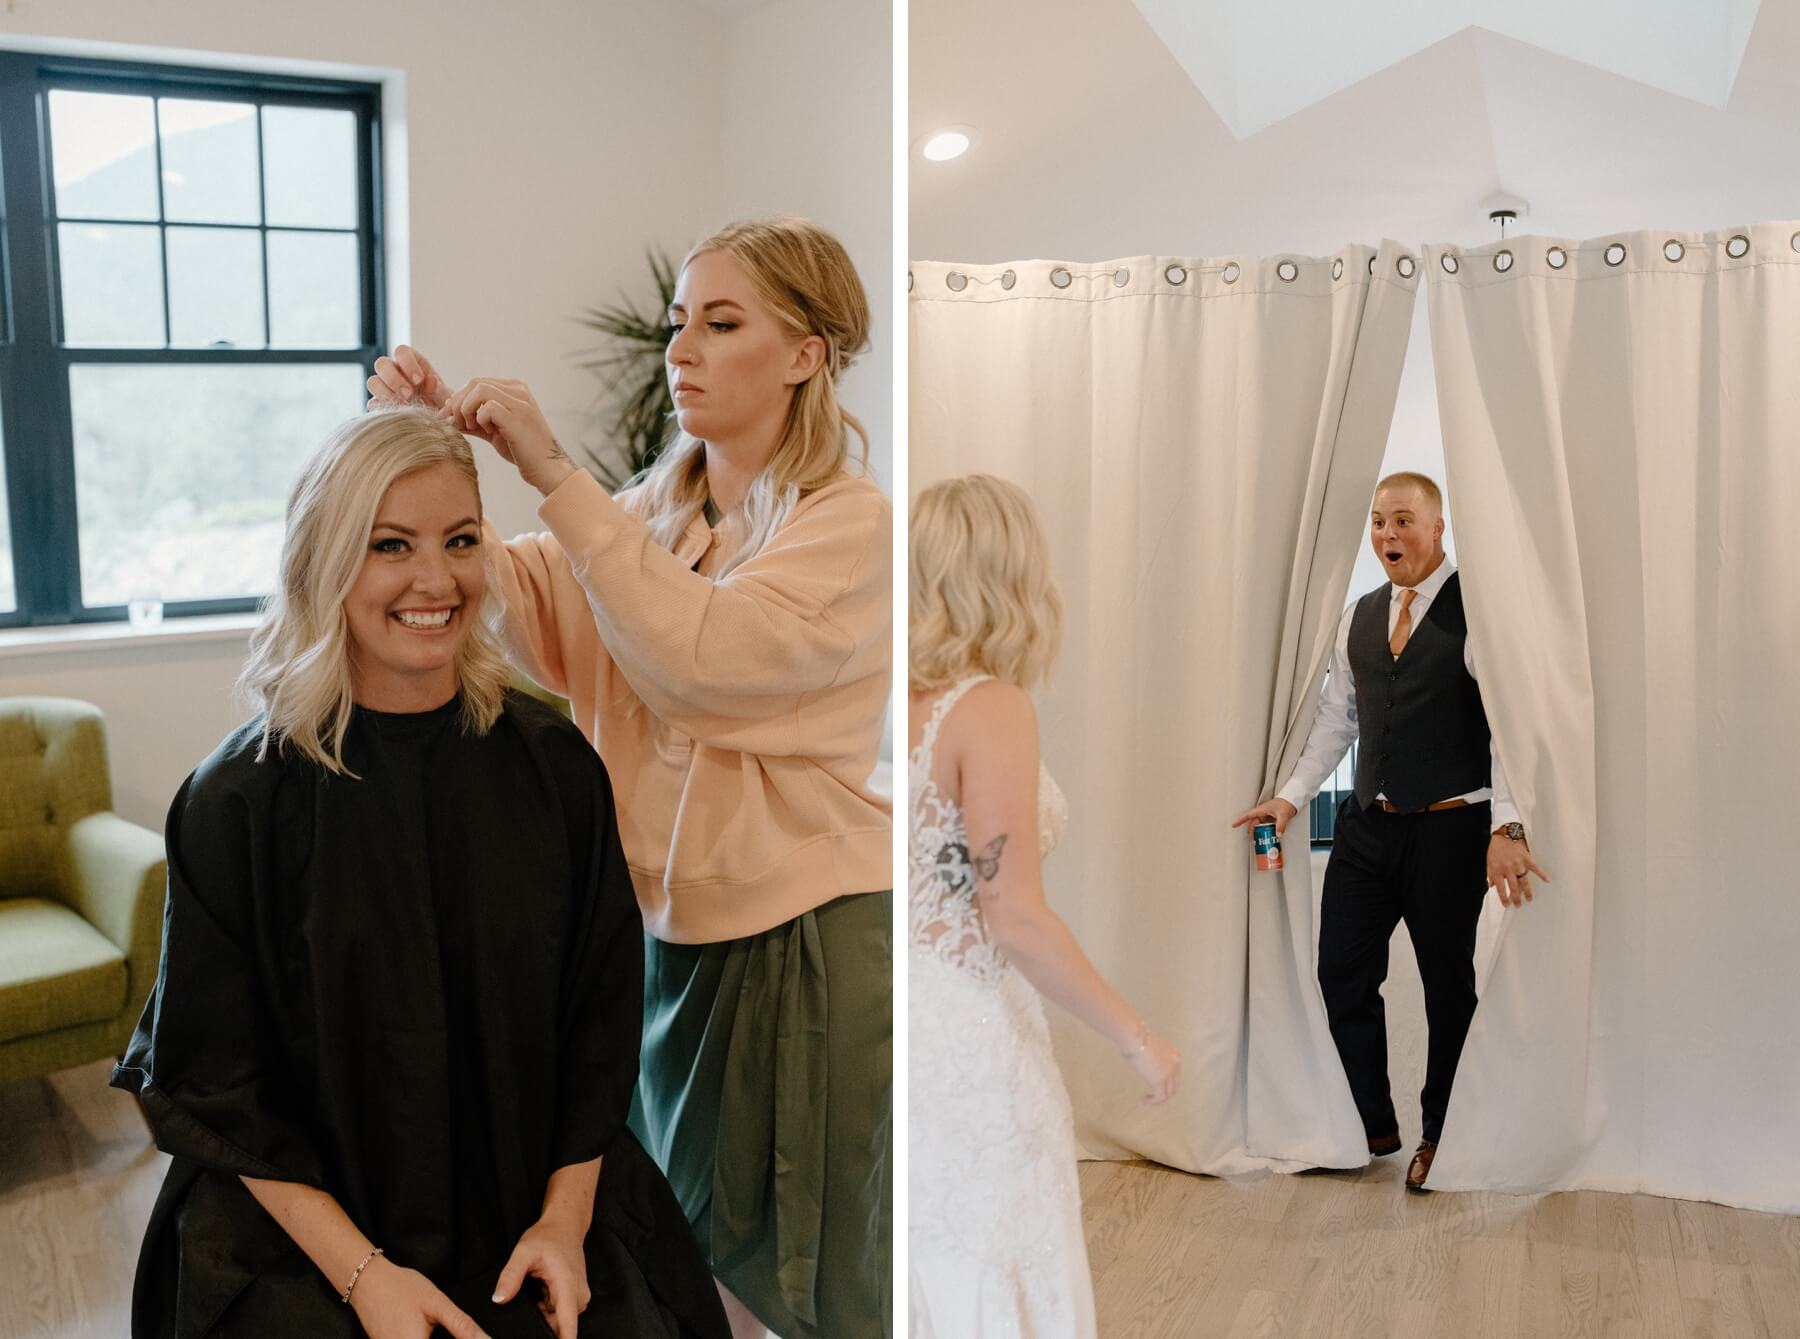 Bride getting haircut in between ceremony at reception | Groom reacting to bride's surprise hair cut | McArthur Weddings and Events